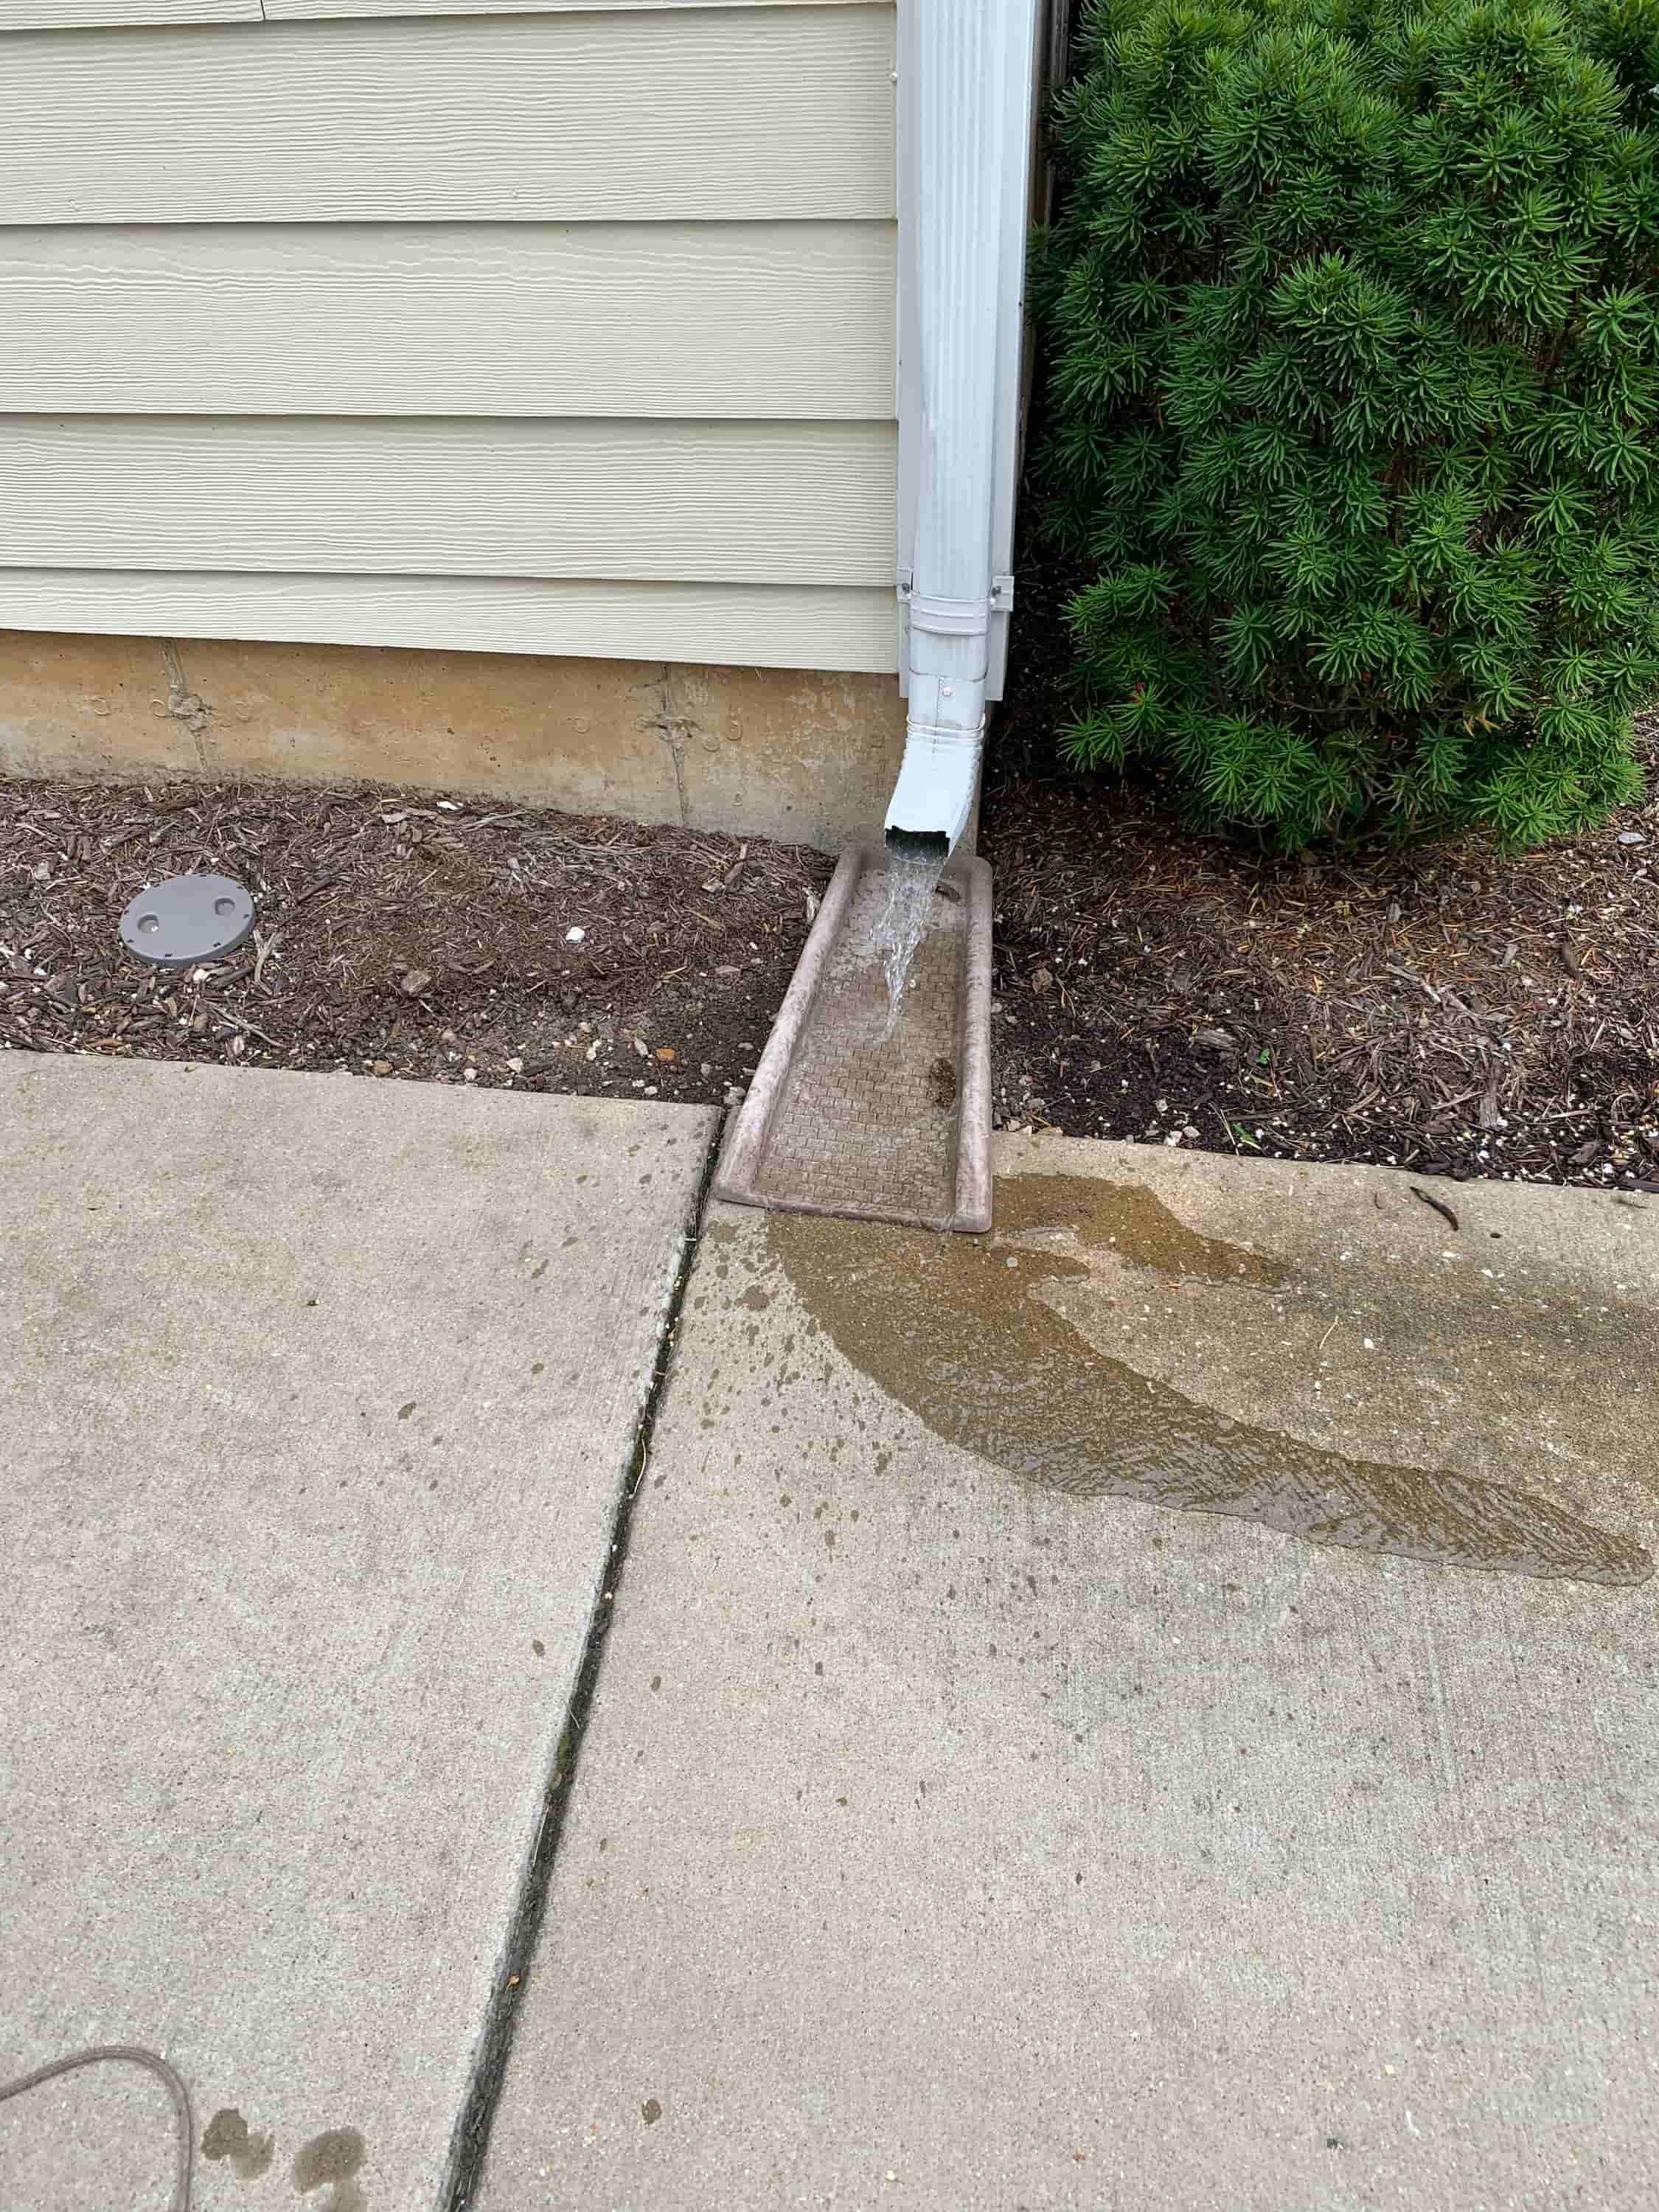 gutter cleaner wand lowes